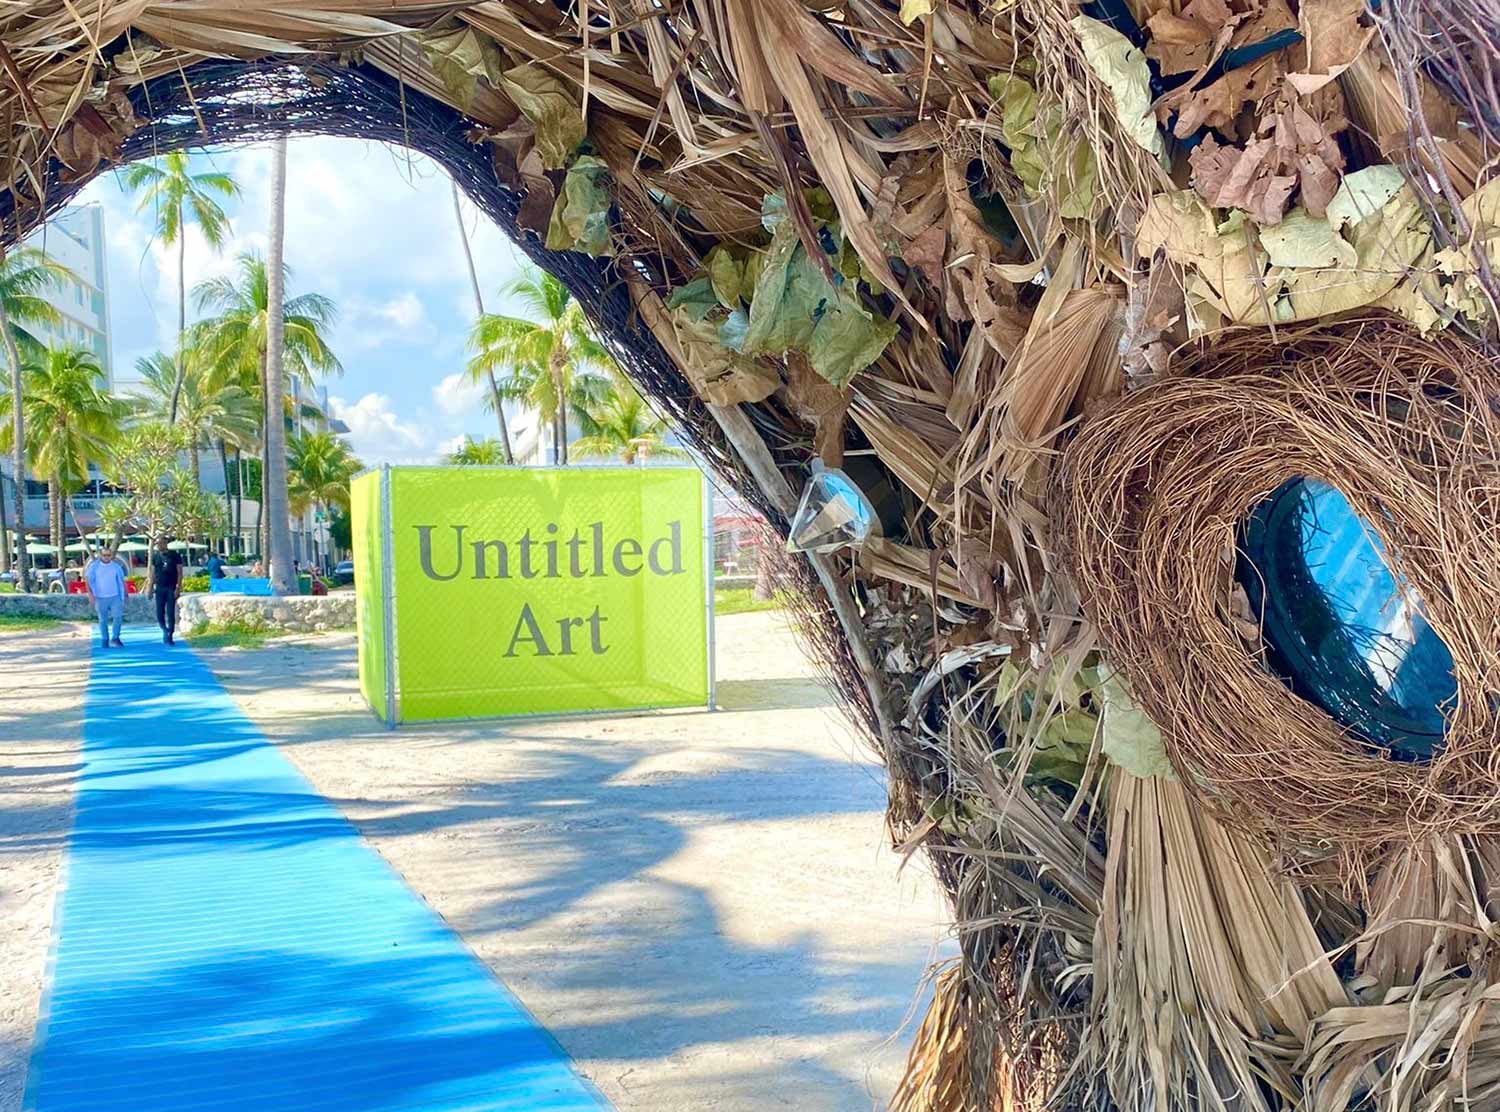 Taking inspiration from the nest of a satin Bower bird, 'Crossing to the Unlimited Ocean' is a unique outdoor art installation by artist Katja Loher that serves as the walkway to the Untitled Art Fair